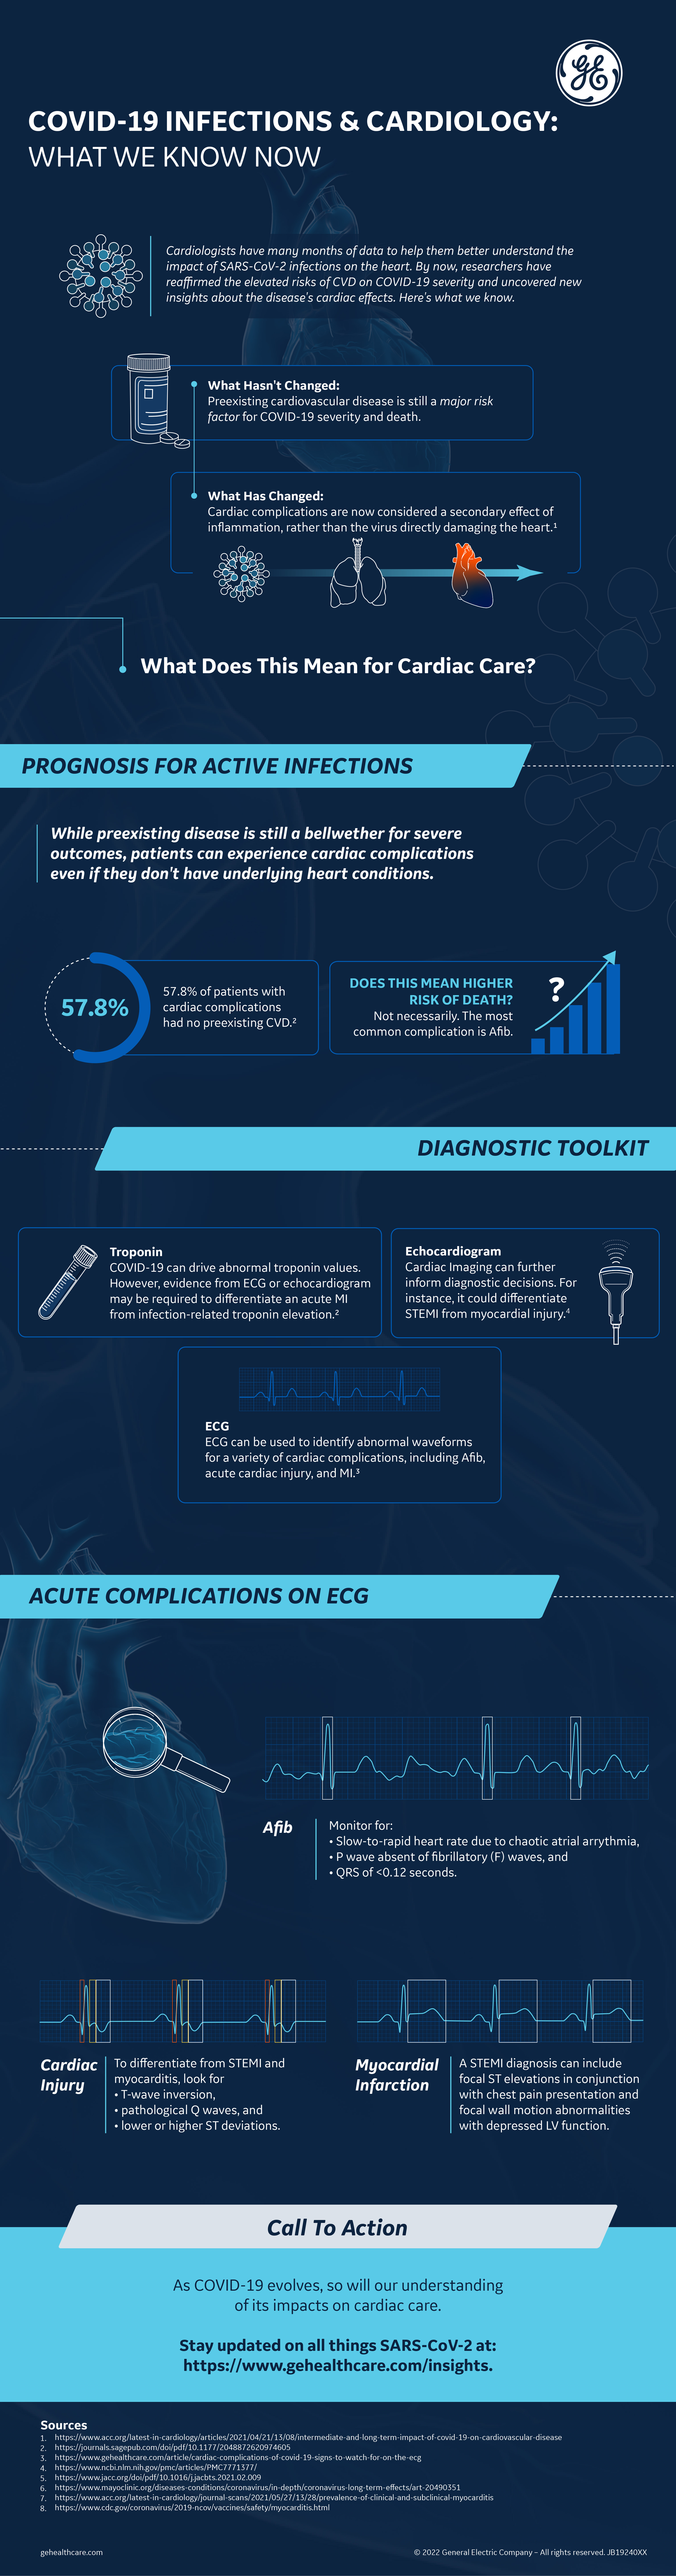 insights-infographic_covid-19-infections-cardiology-what-we-know-now_dcar_global_jb19240xx.jpg